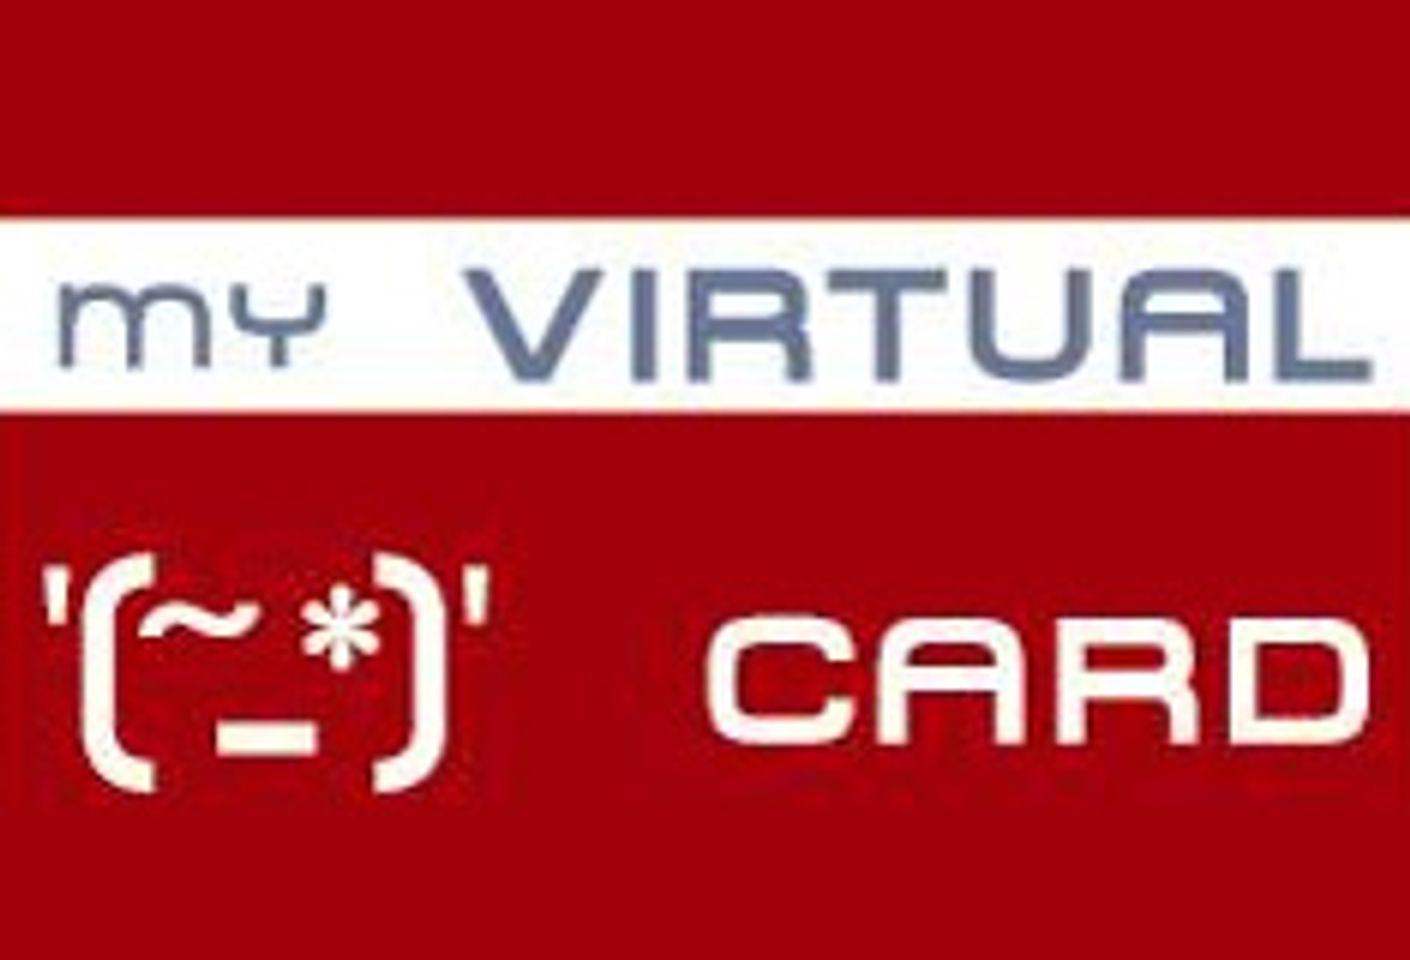 myVirtualCard.com Unlimited Free Processing Offer Now in Effect for All